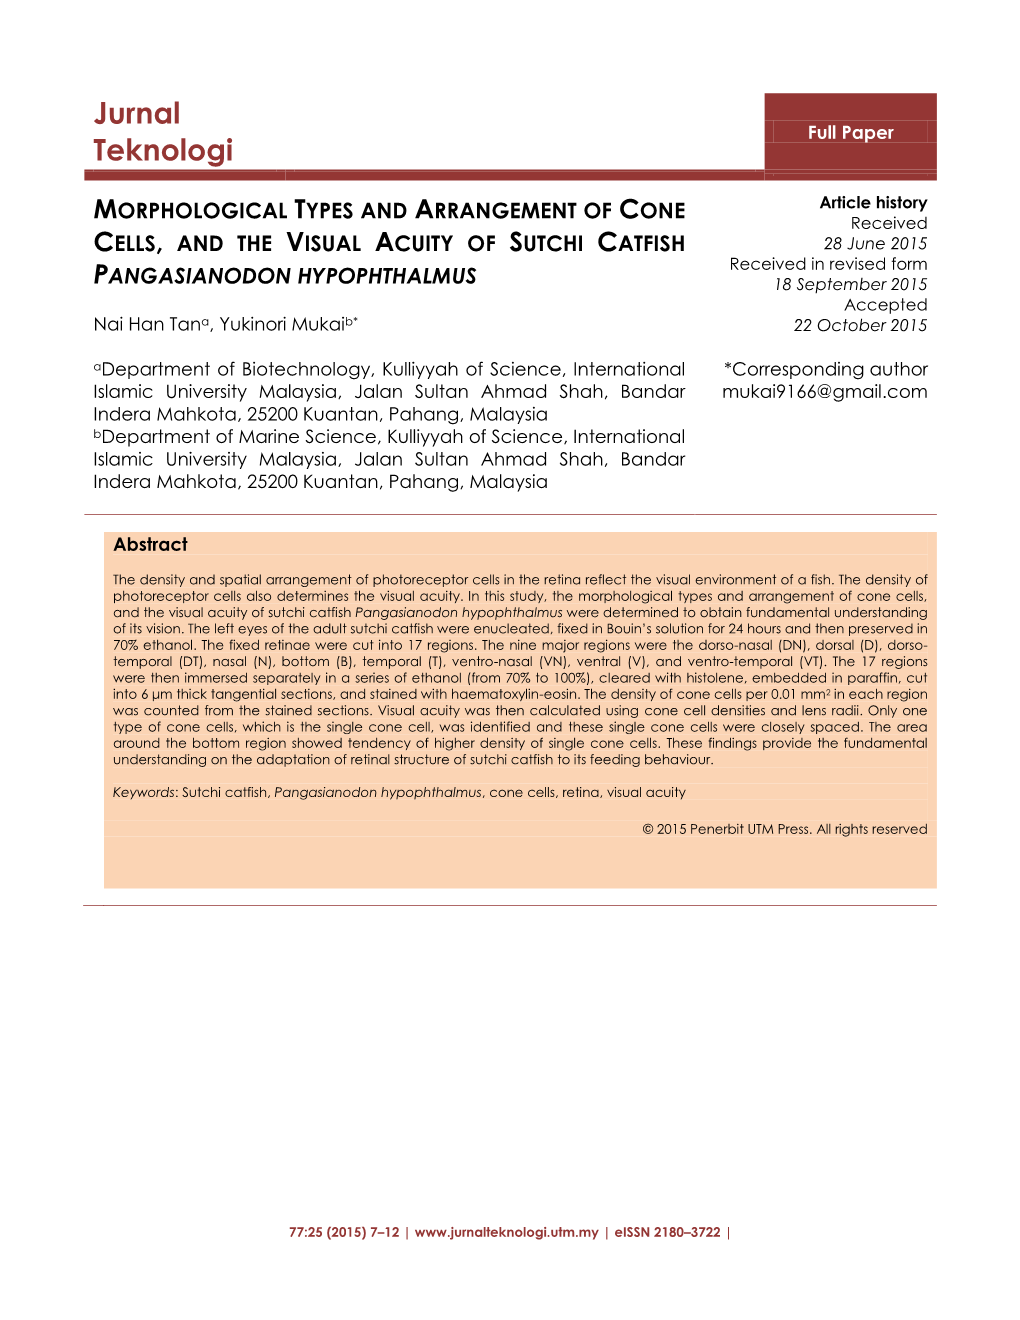 Morphological Types and Arrangement of Cone Cells